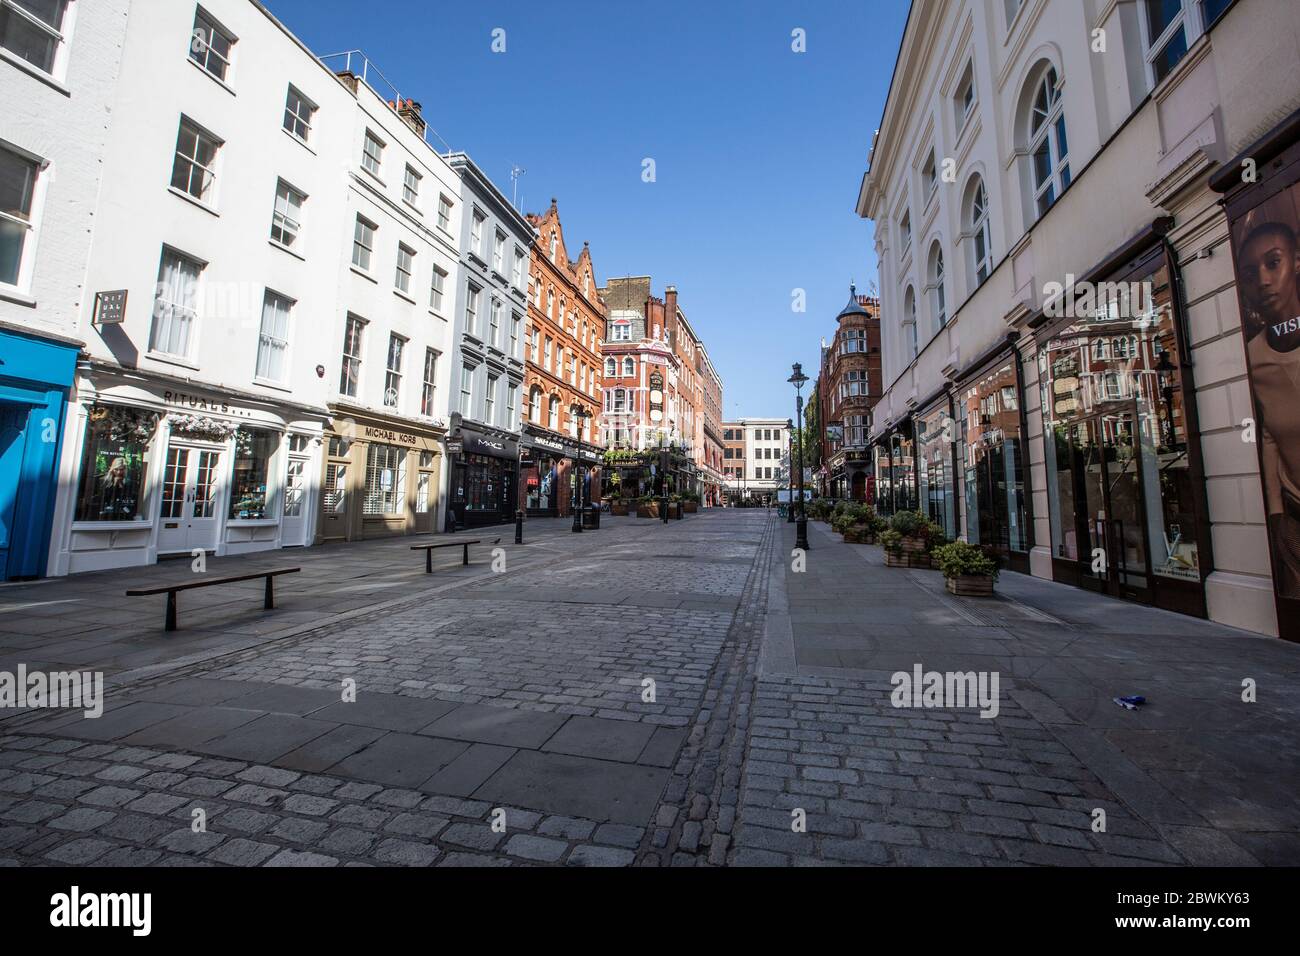 Empty streets of Covent Garden area of the West End in London during the coronavirus lockdown restrictions where businesses are unable to open, UK Stock Photo